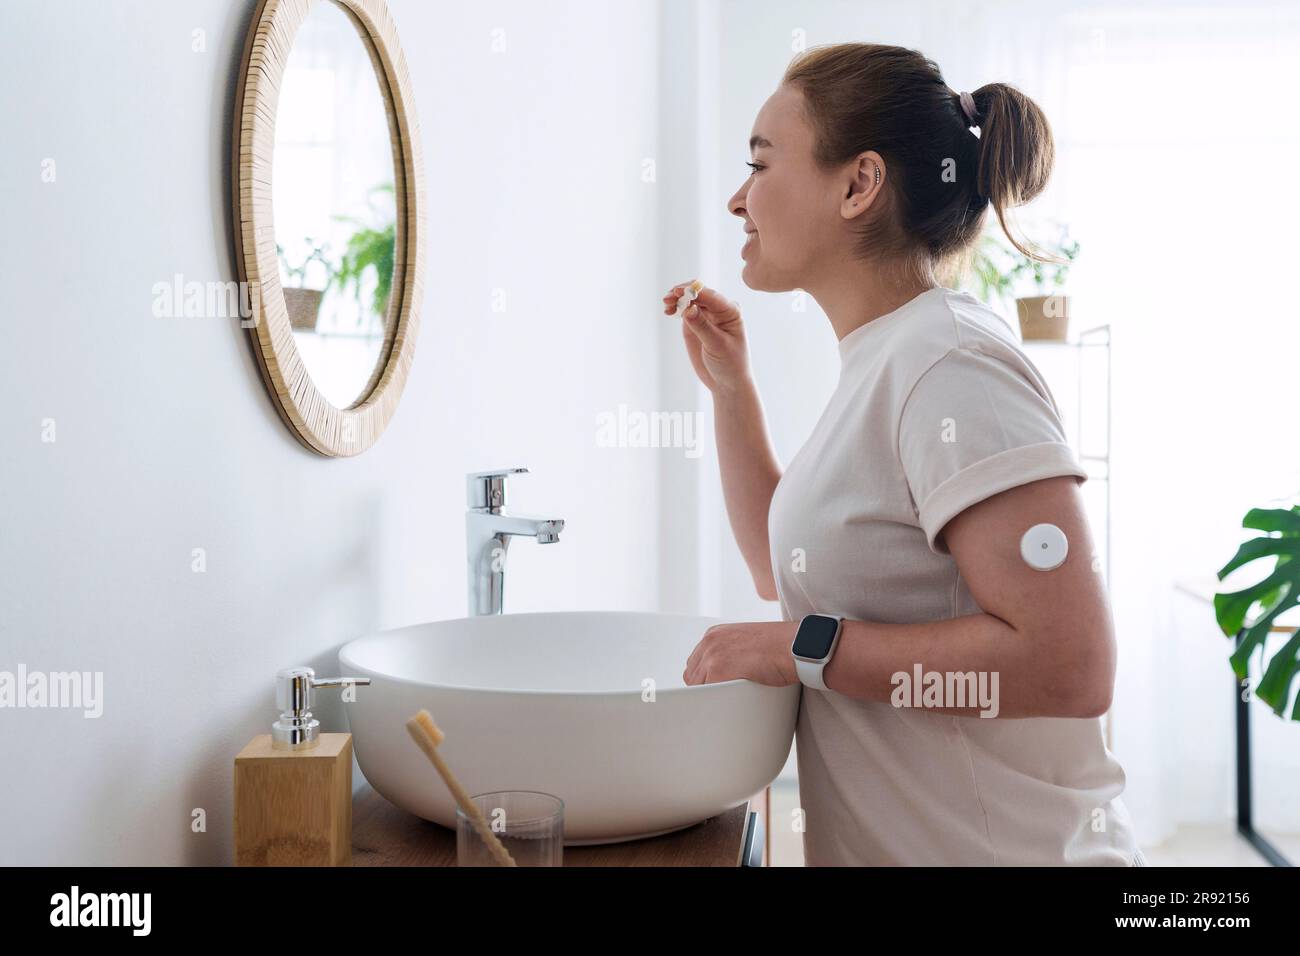 Woman with diabetes brushing teeth in bathroom at home Stock Photo